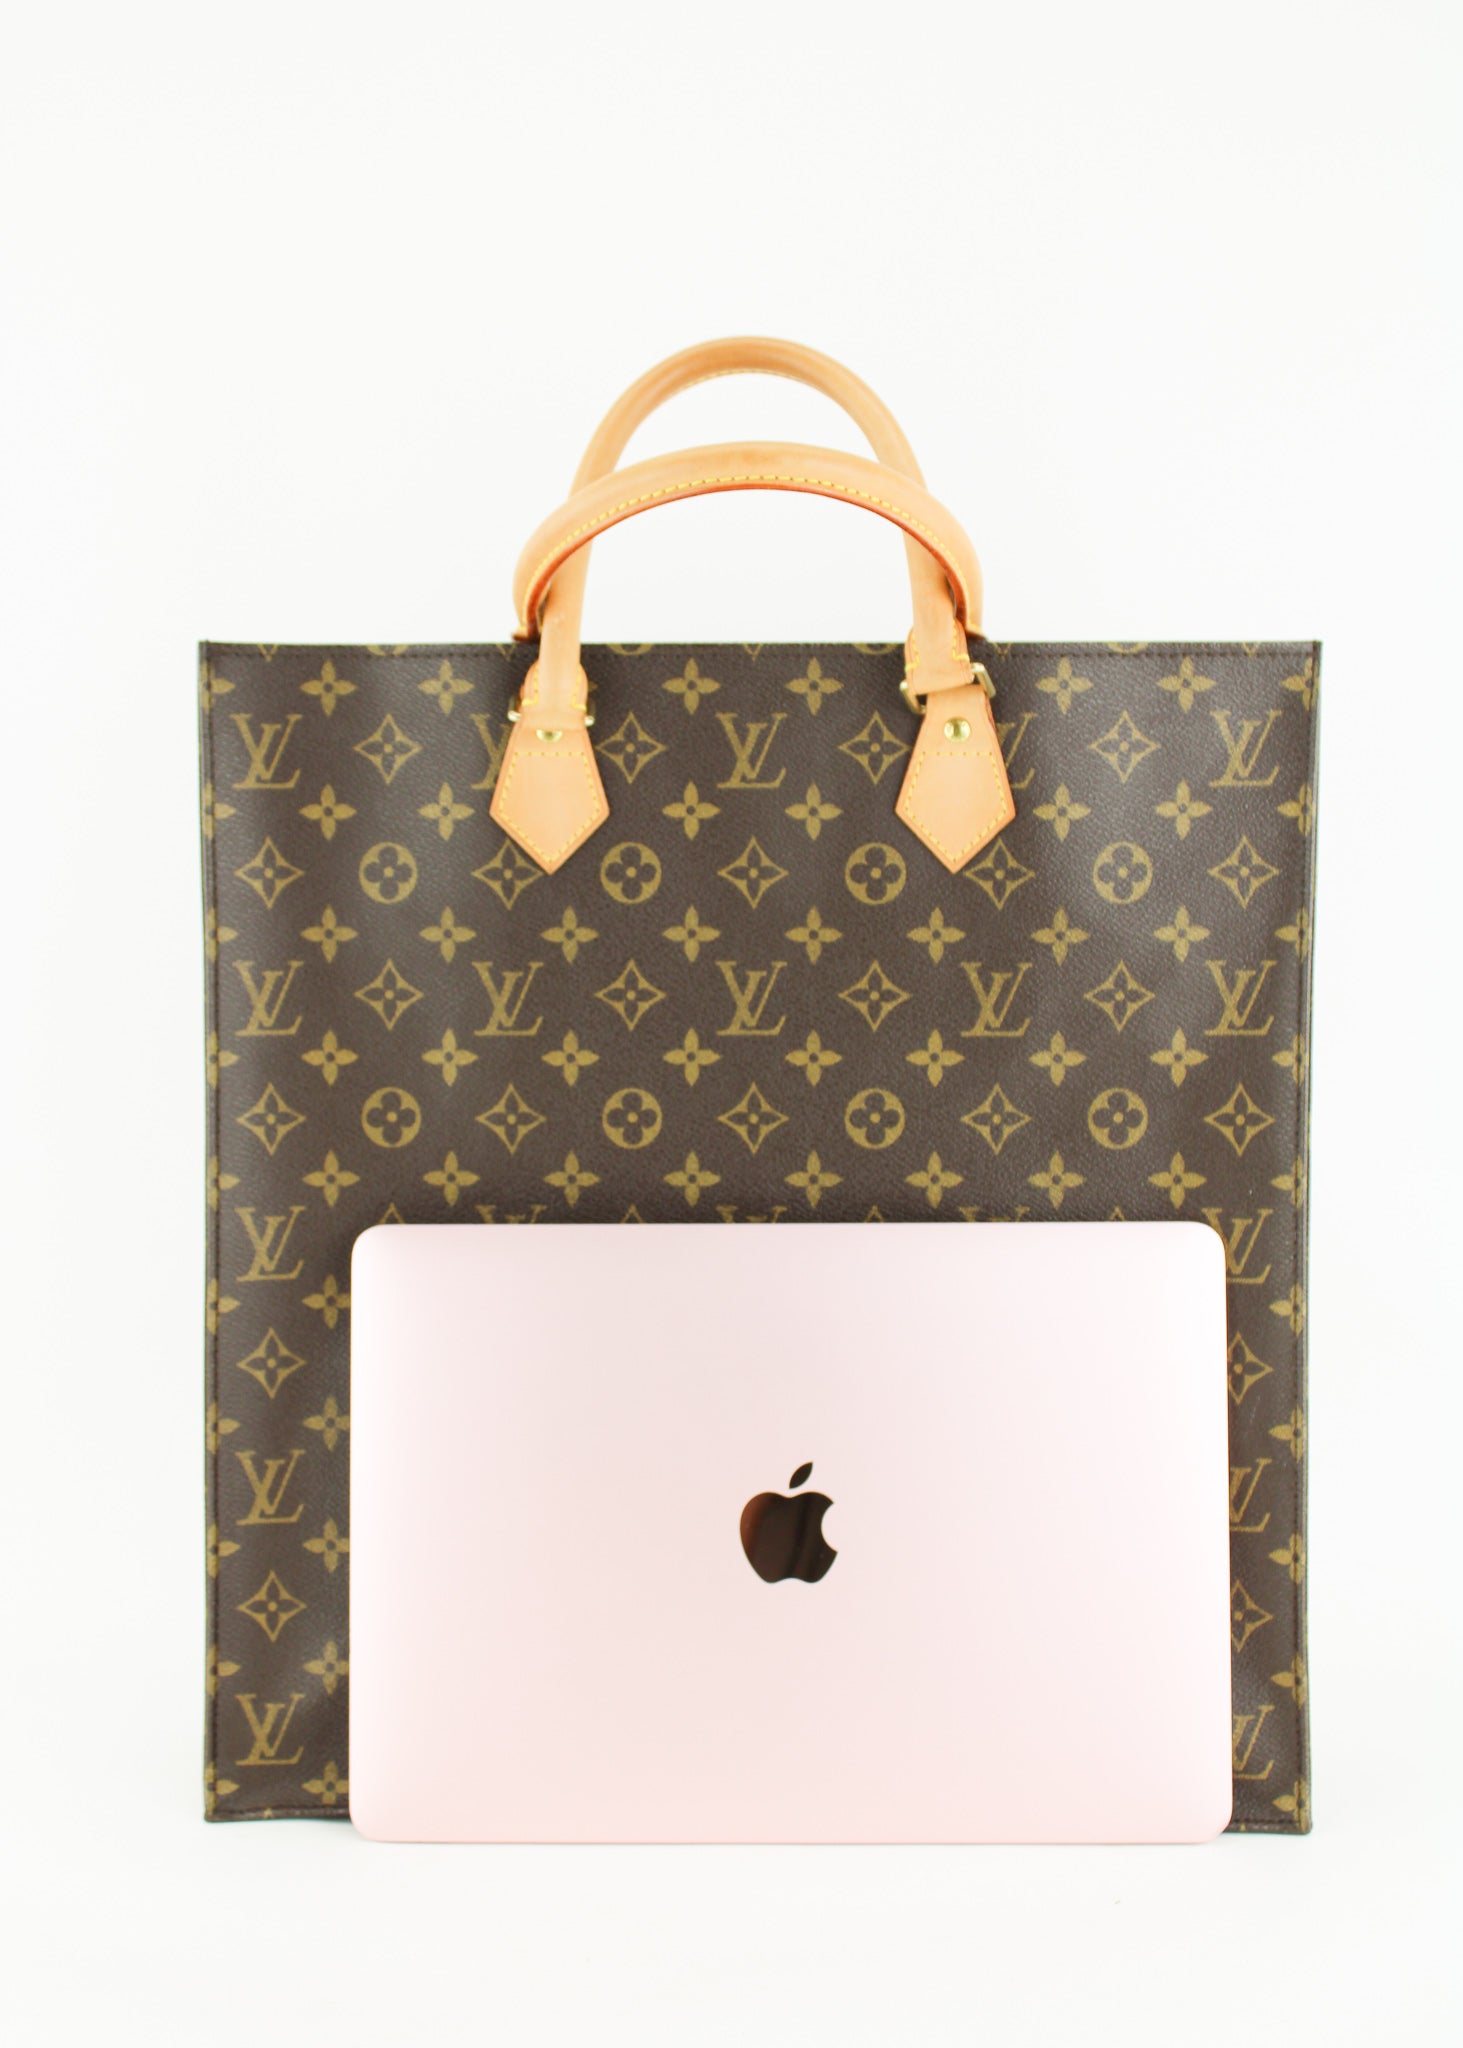 Sold at Auction: LOUIS VUITTON, A SAC PLAT TOTE STYLED IN MONOGRAM COATED  CANVAS WITH VACHETTA LEATHER TRIM, 37 X 36 X 9CM, A/F